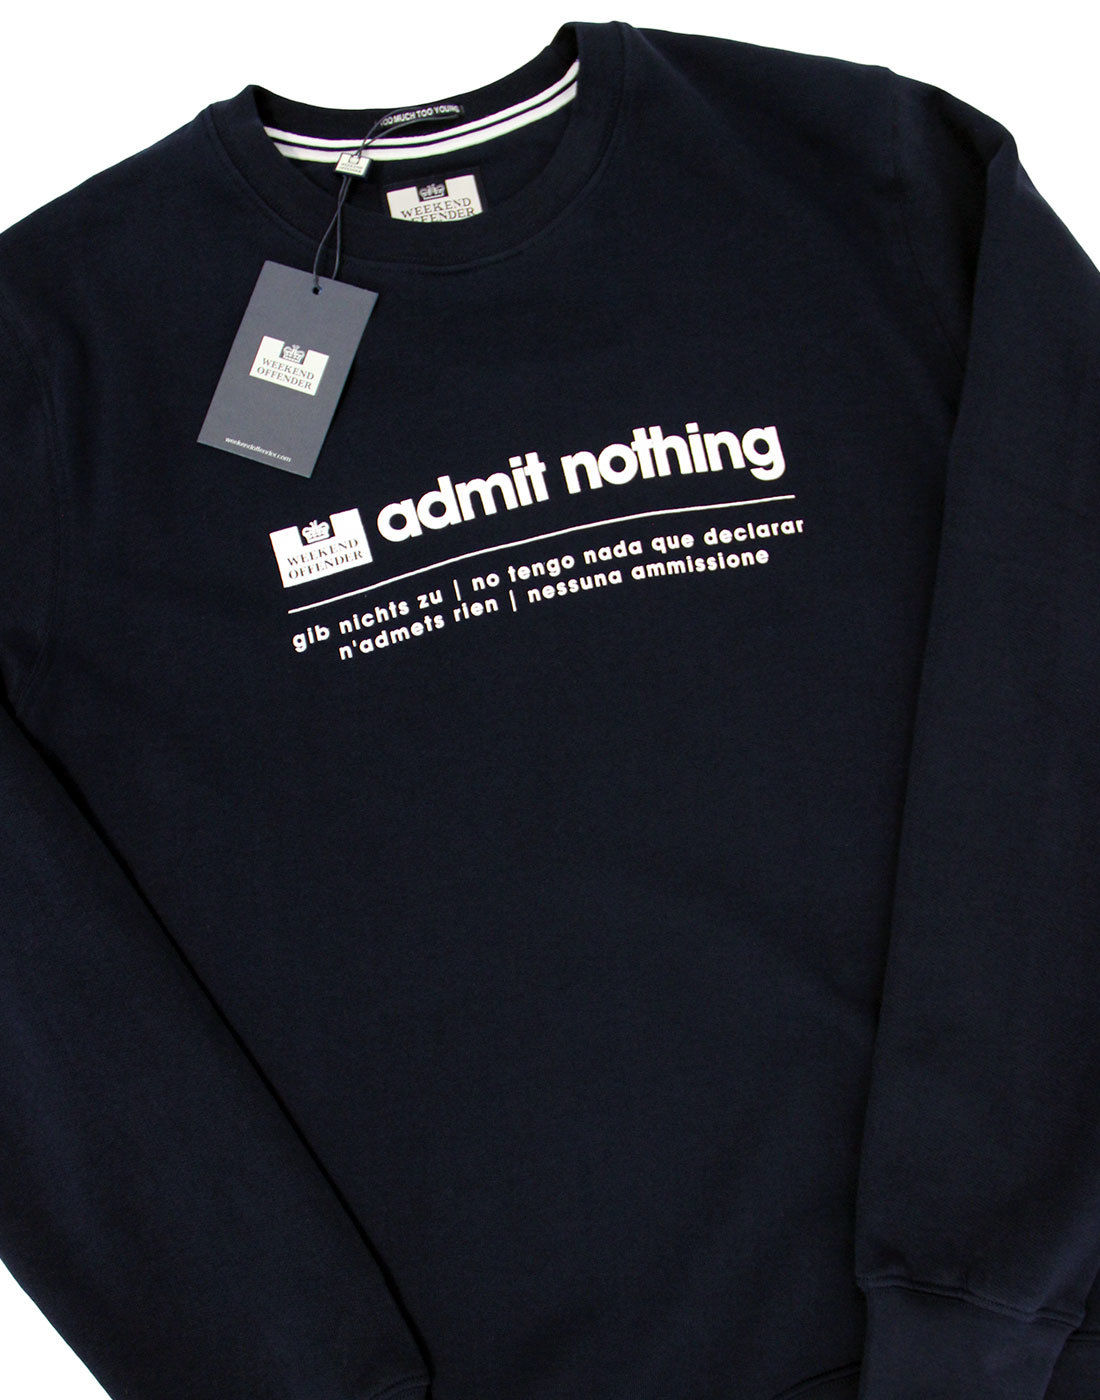 WEEKEND OFFENDER Polyglots Retro Mod Casuals Sweater.